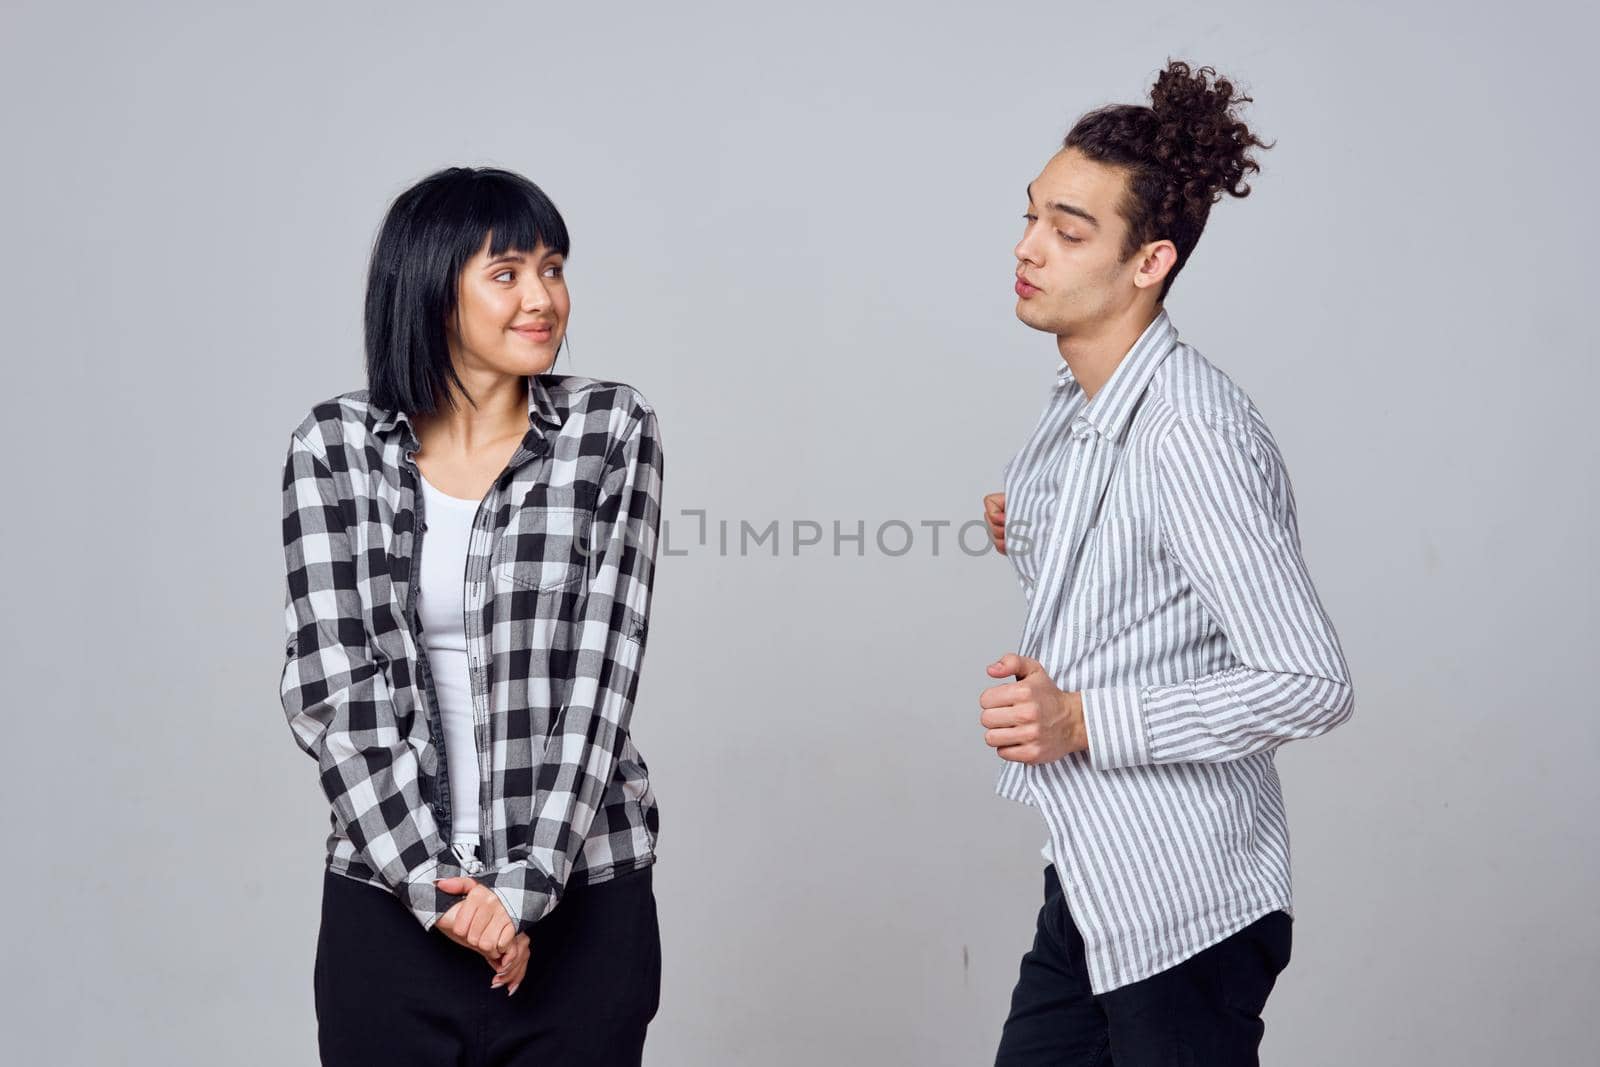 young couple modern clothes posing fun friendship. High quality photo